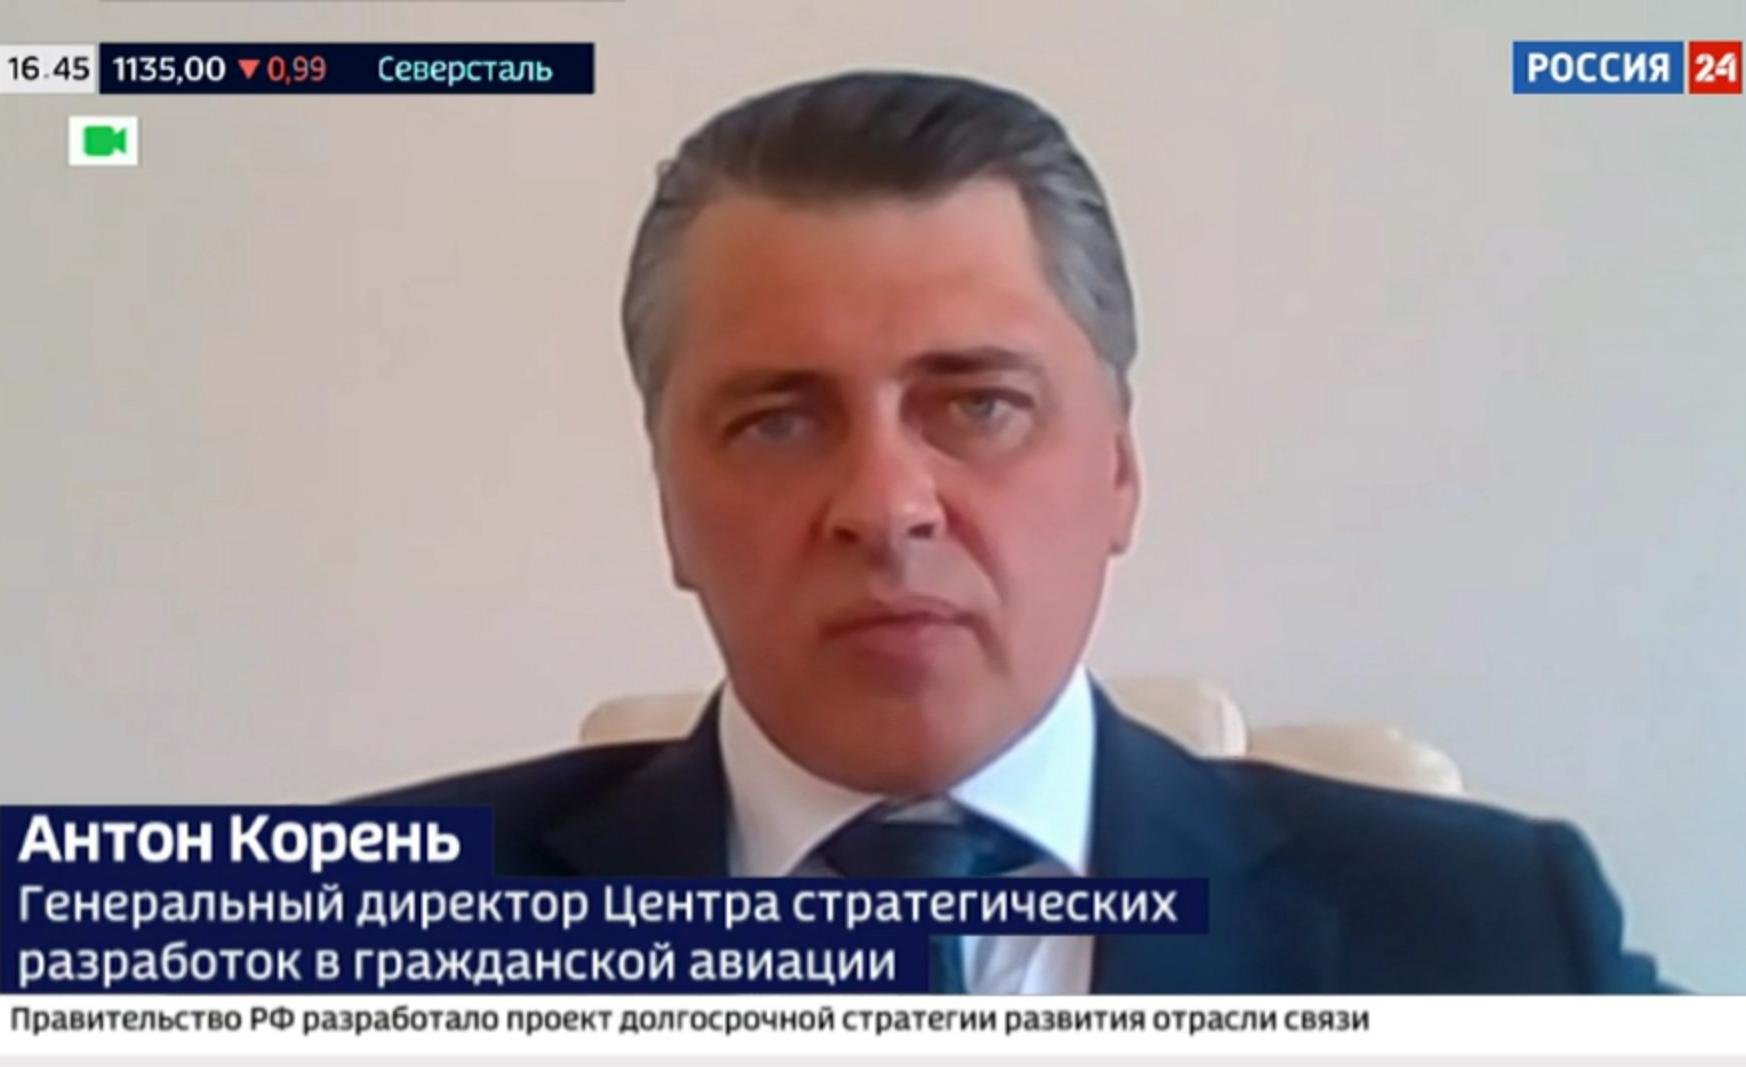 Anton Koren, Head of the TSC Consortium,  on the air of the Rossiya 24 federal TV channel